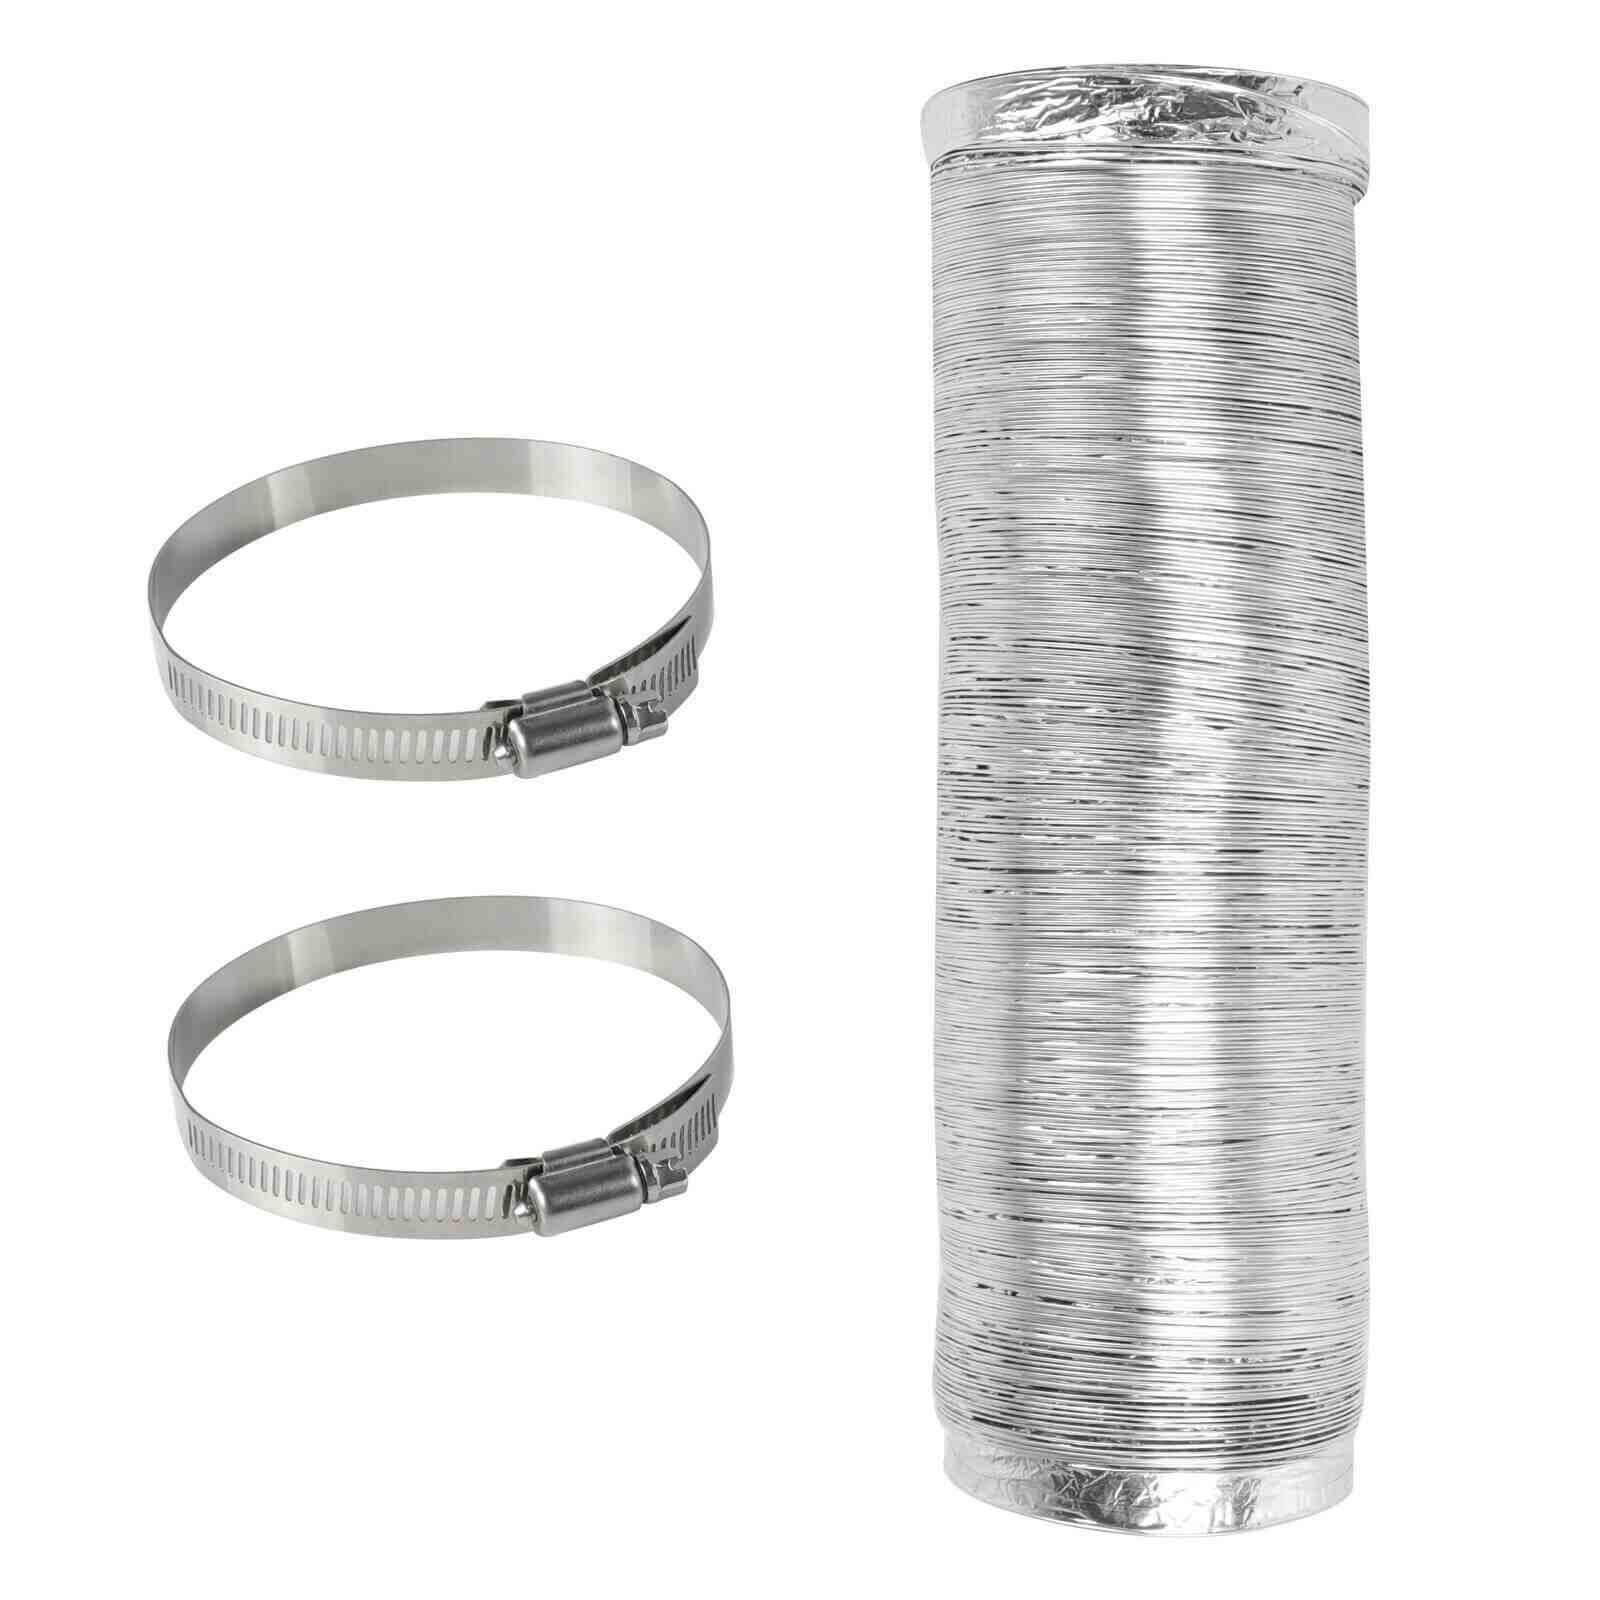 Package of 4/6/8"Non-Insulated Aluminum Air Ventilation Ducting Vent Hose